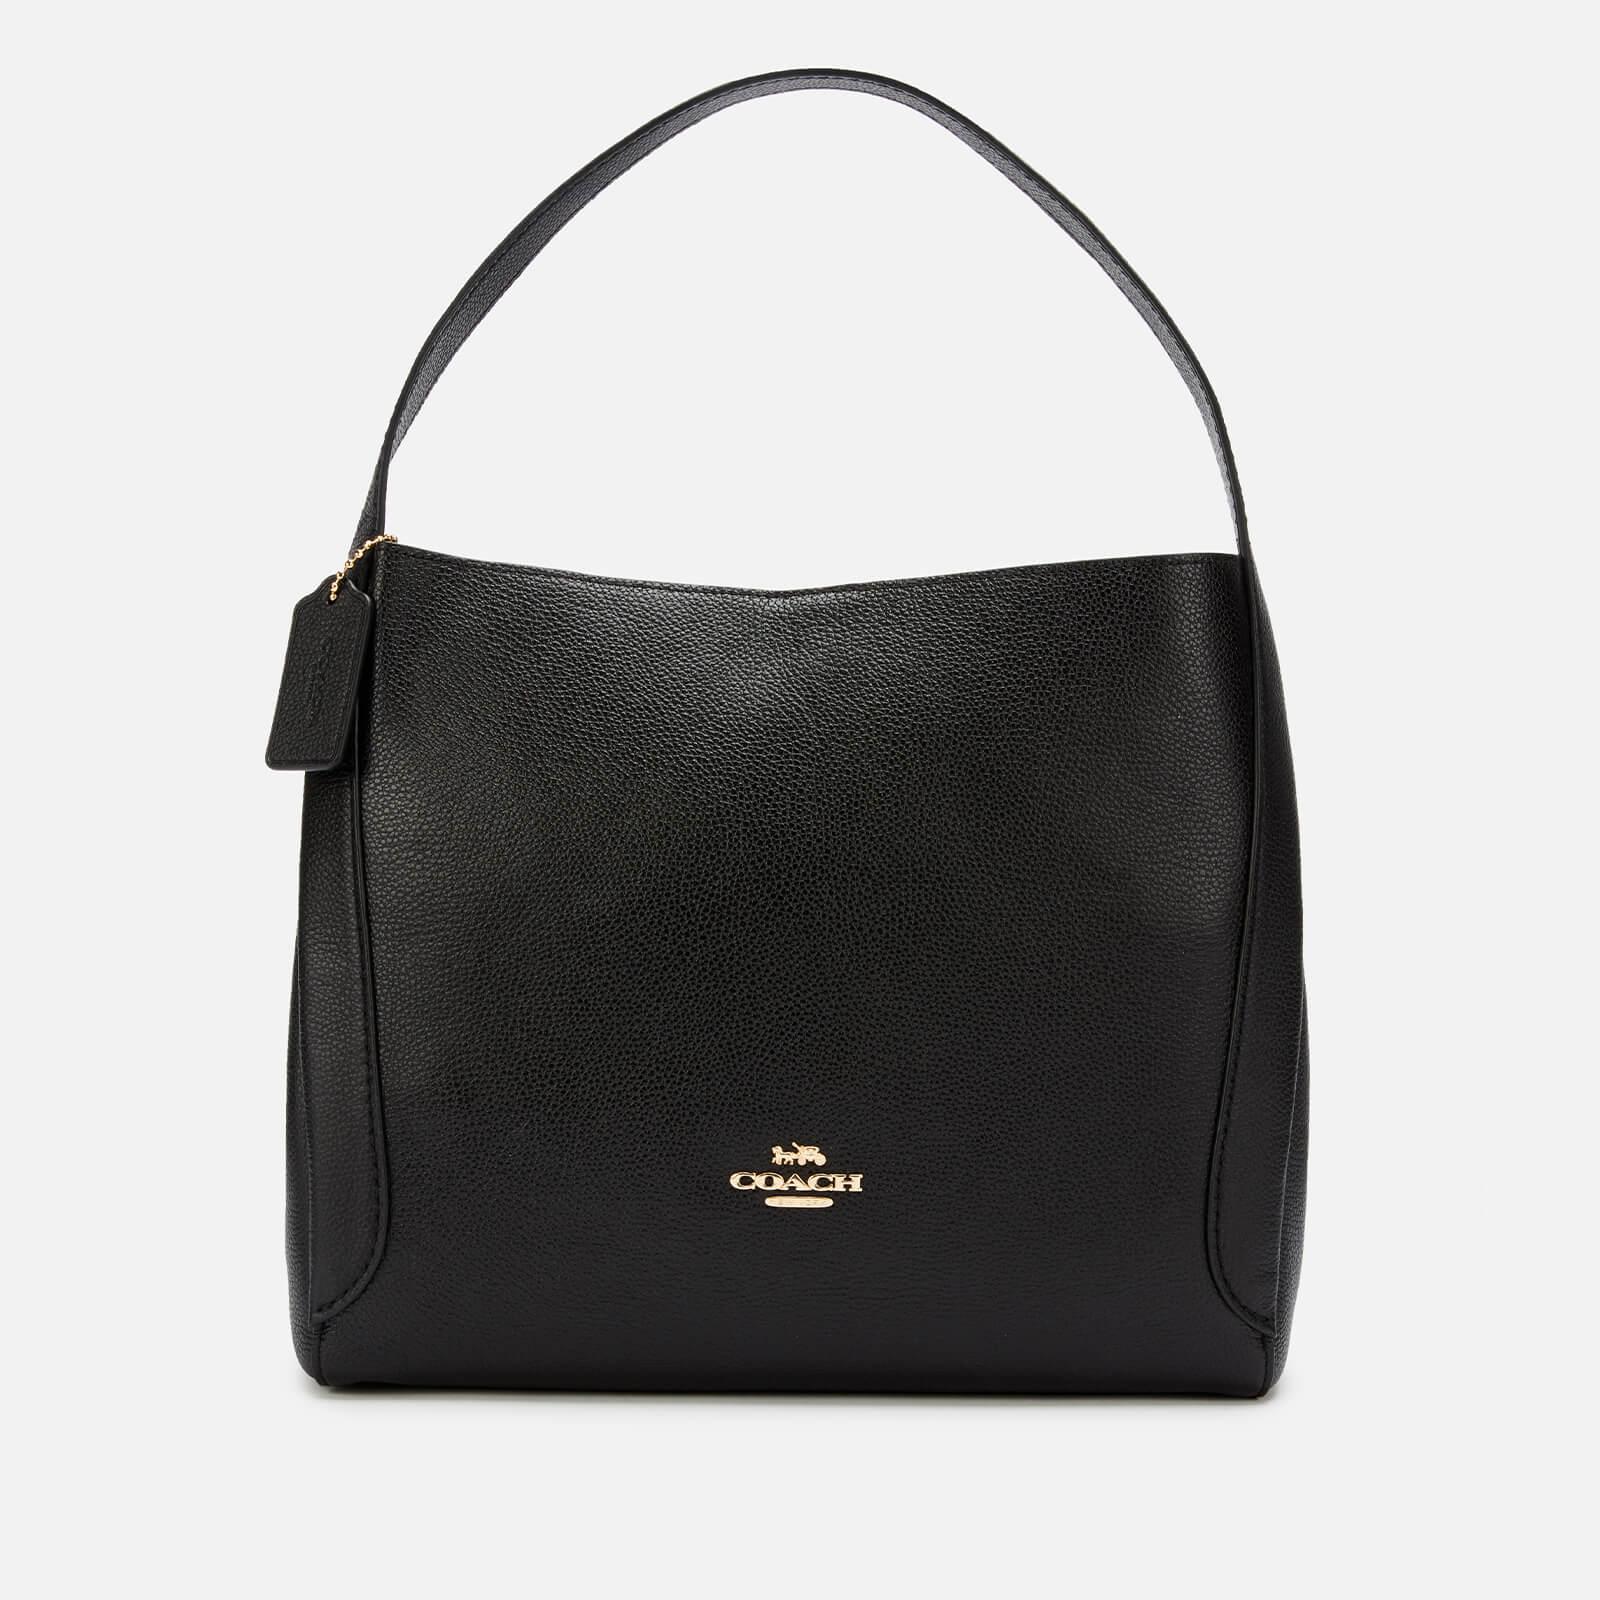 COACH Polished Pebble Leather Hadley Hobo Bag in Black - Lyst